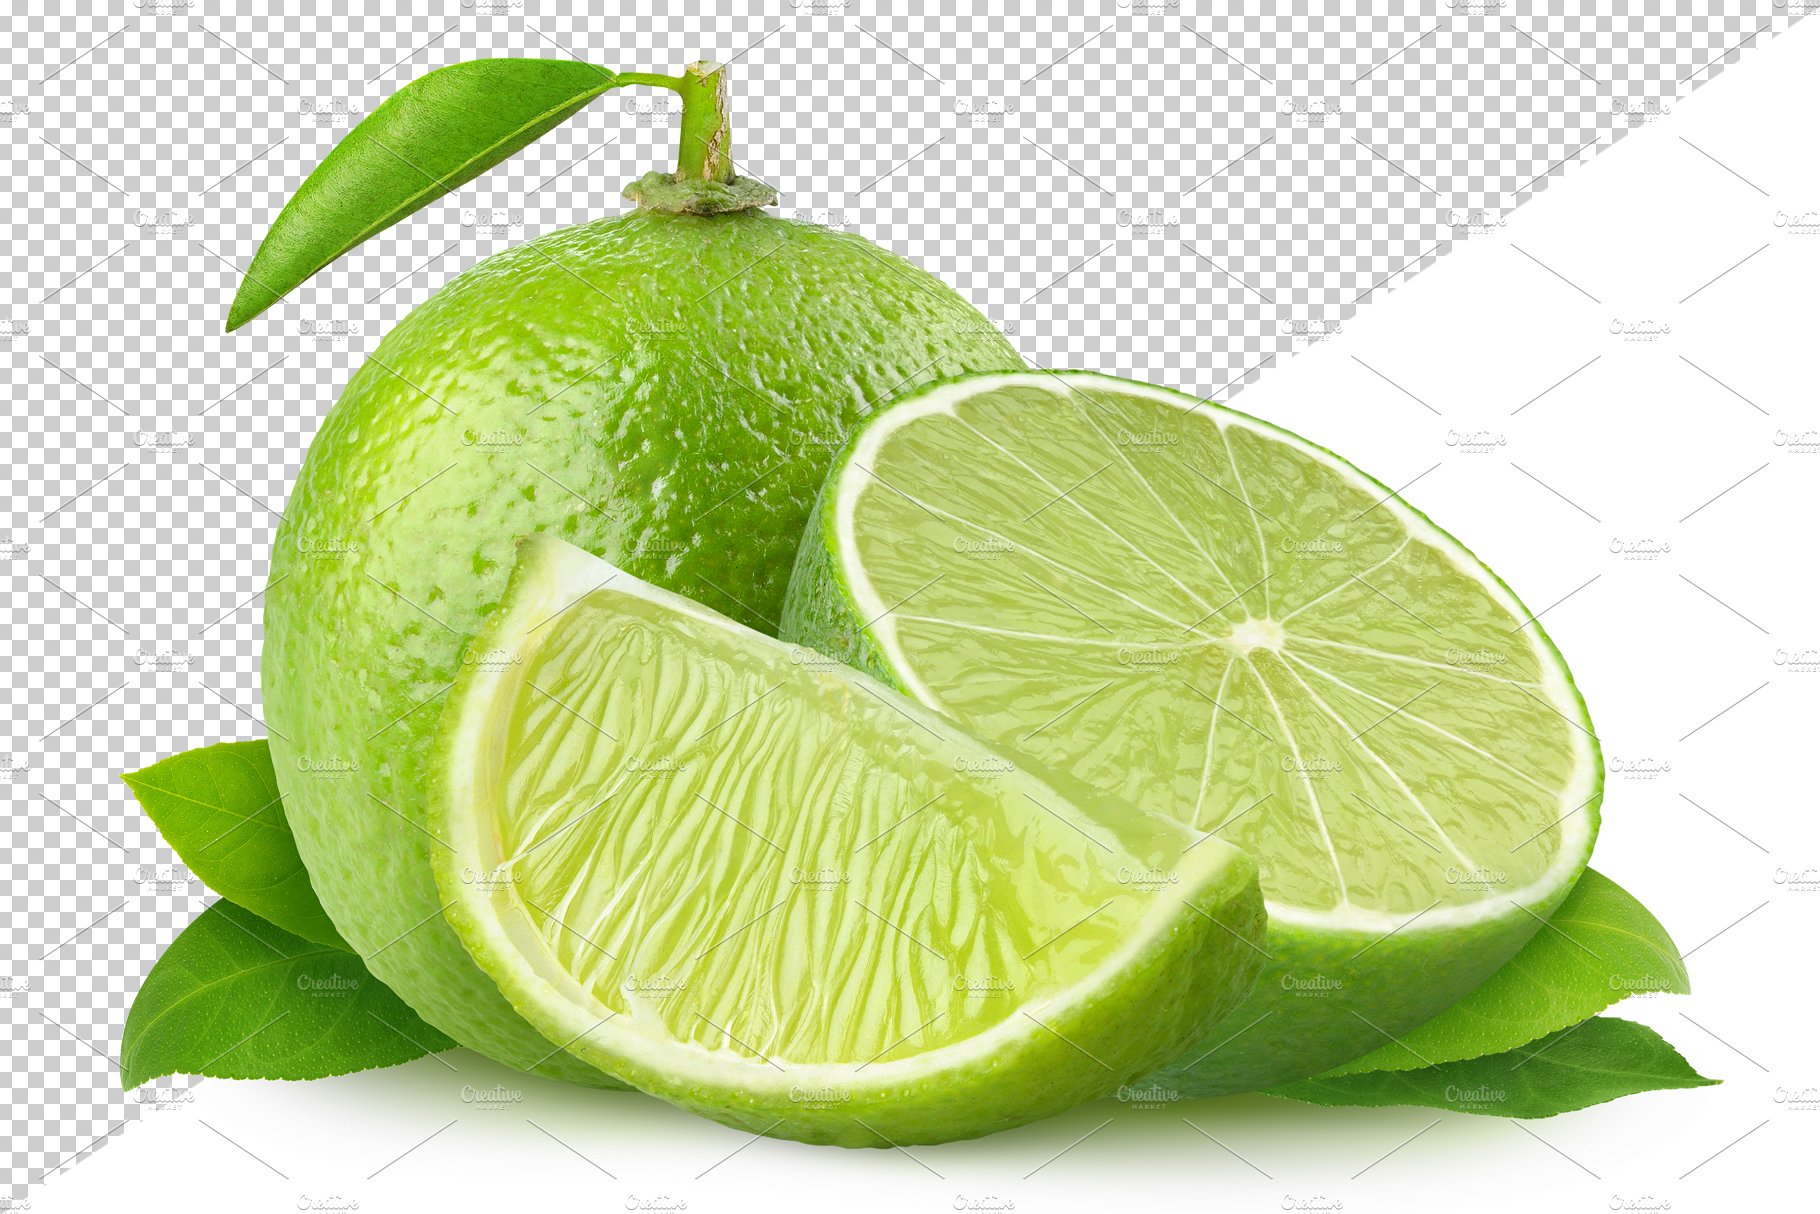 Cut limes preview image.